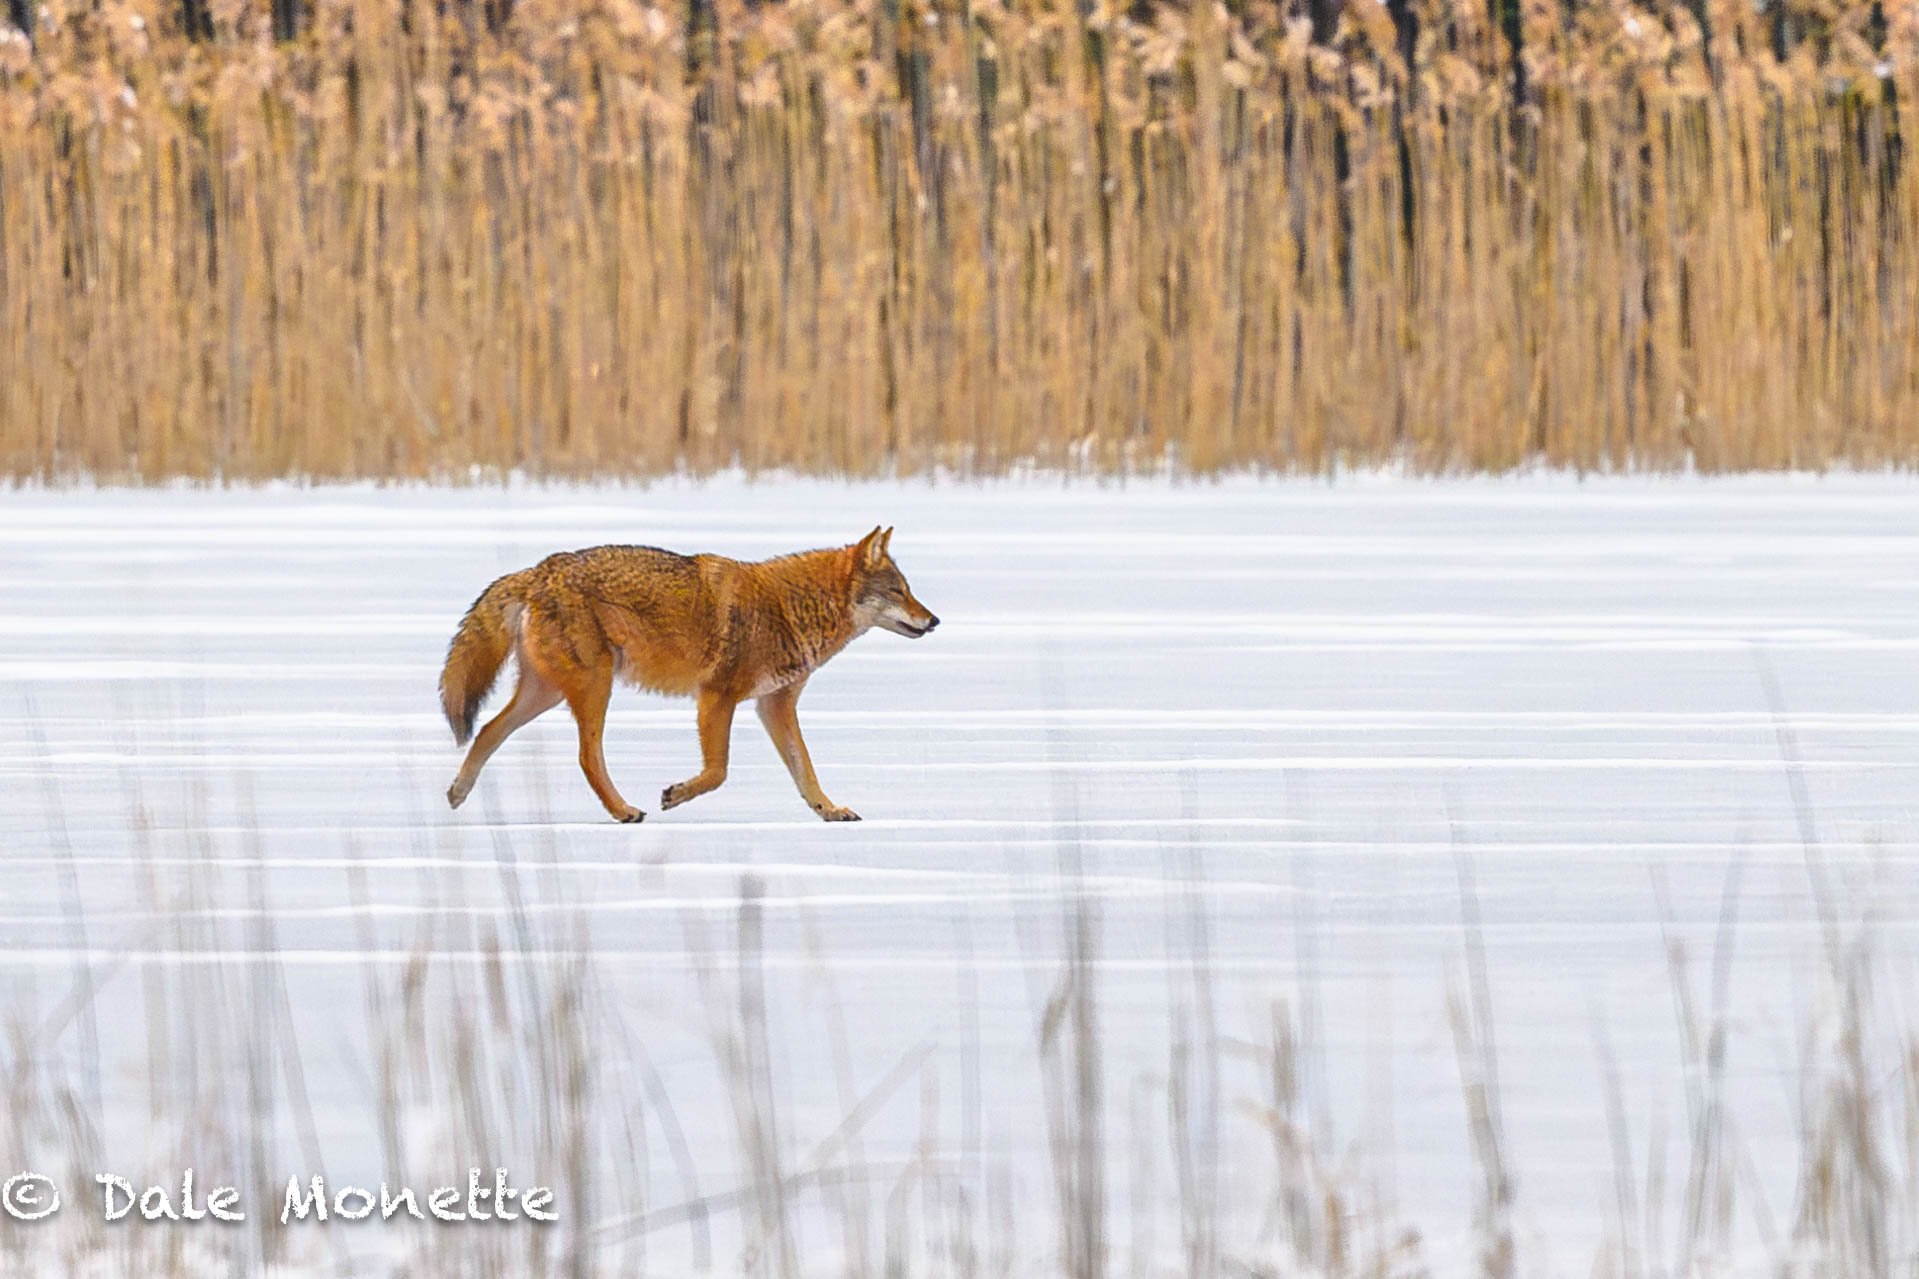   I found this eastern coyote with an orange tinged pelage cruising the ice in New Salem this morning.  Its been about 5 years since Ive seen one like this. The last orangish one I photographed was about two miles from this one. A payoff after a 2 ho